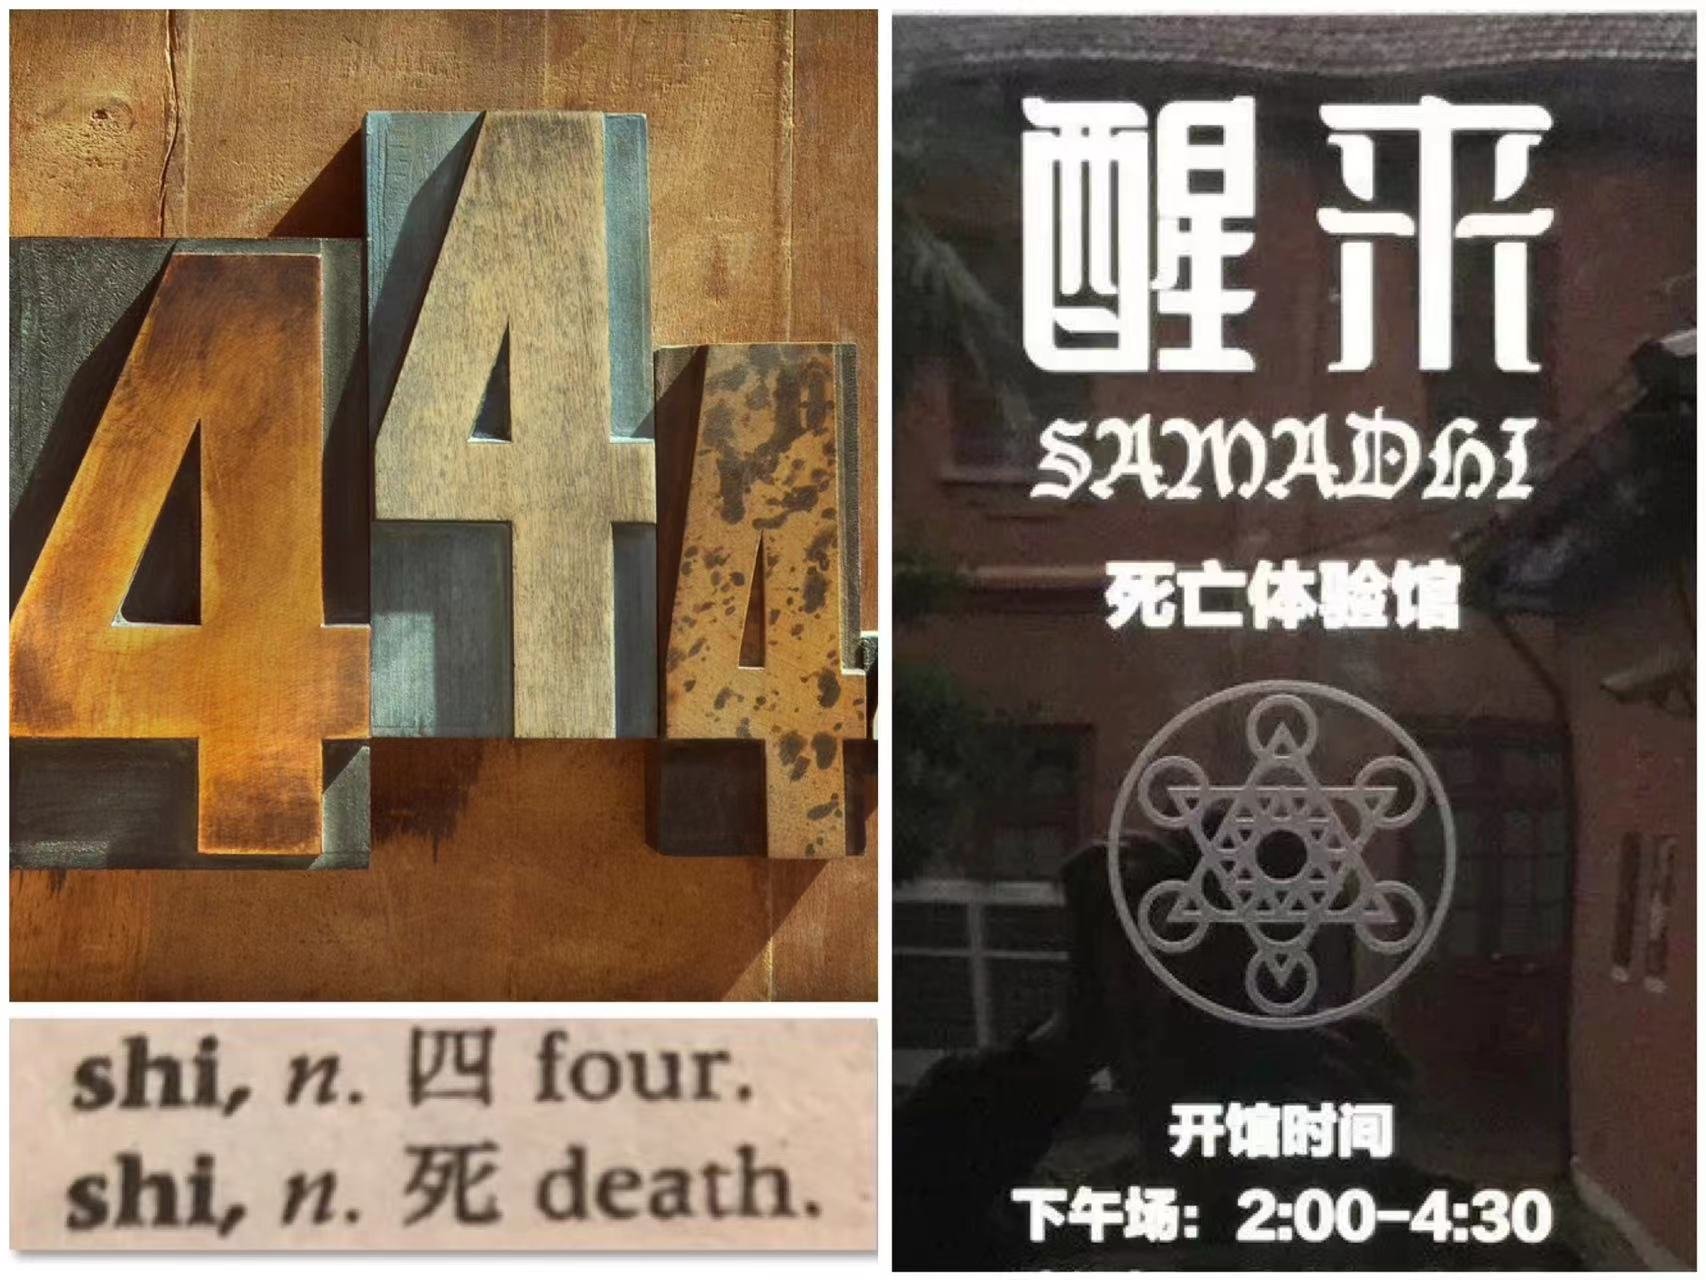 Zhou Yan's best purchase in China: Tickets to the ‘Wake Up Dead Experience’, where the tickets cost RMB444.